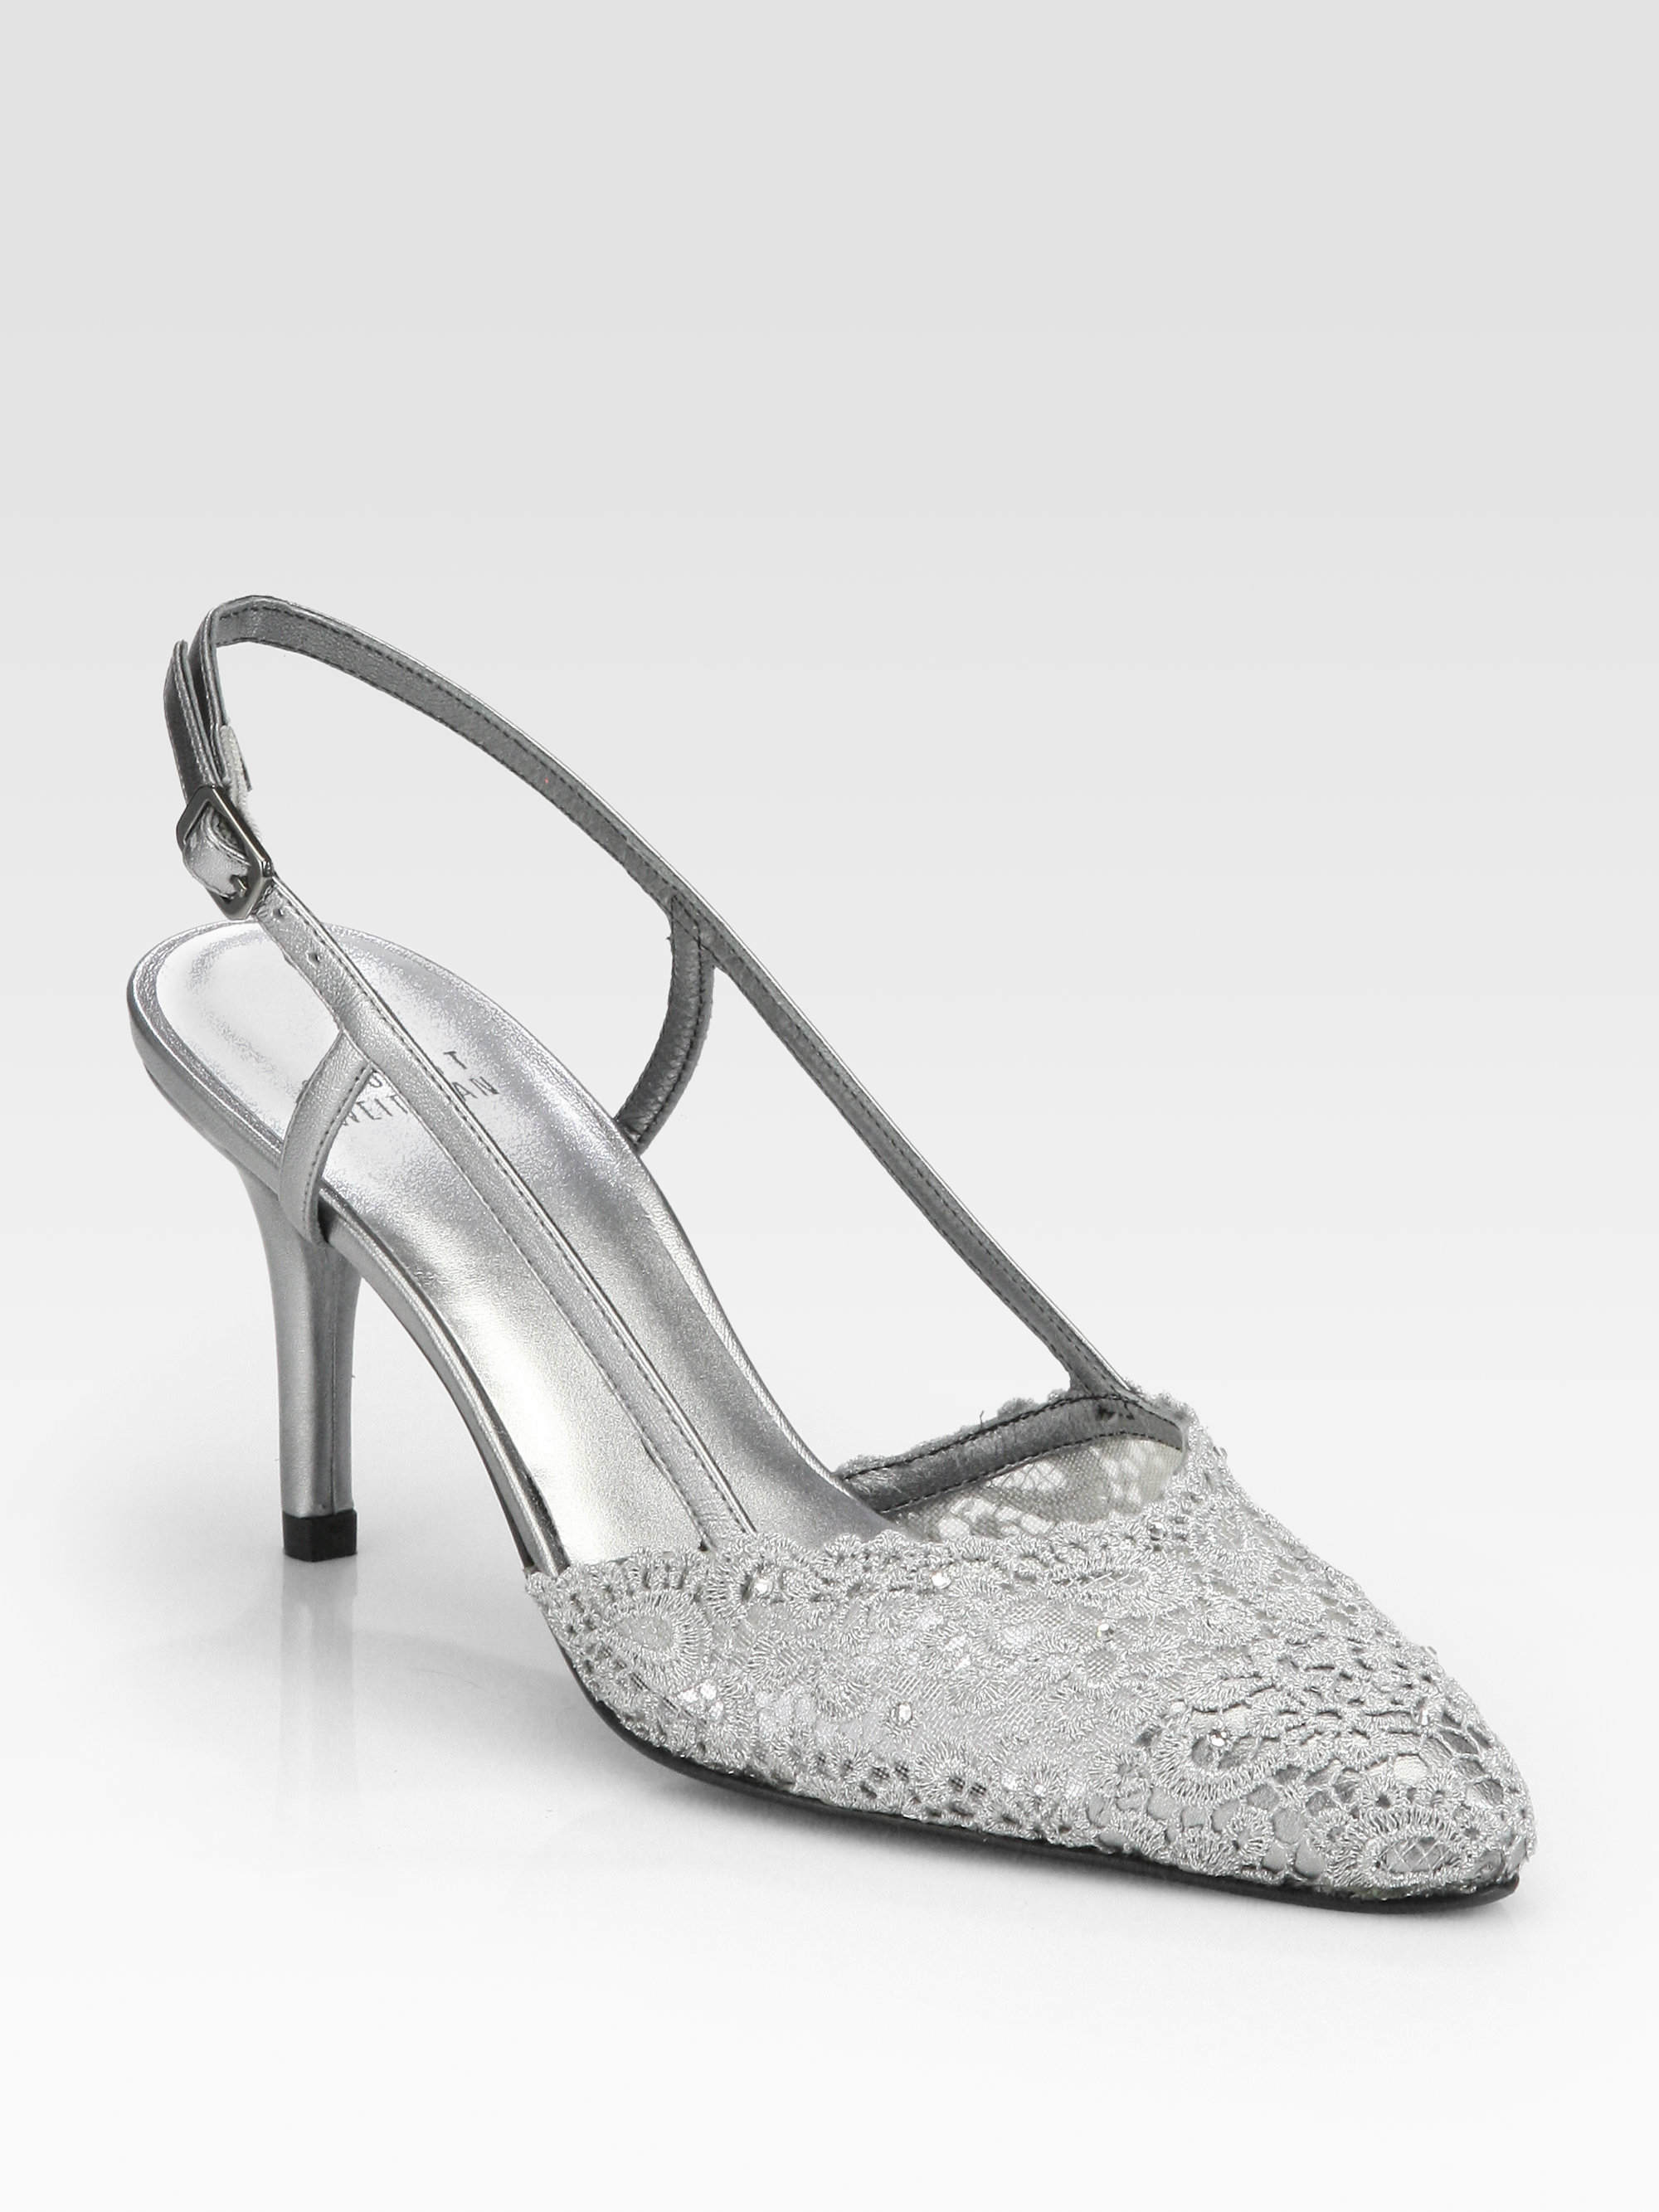 Lyst - Stuart Weitzman Lady Crystaldetailed Lace Slingback Pumps in